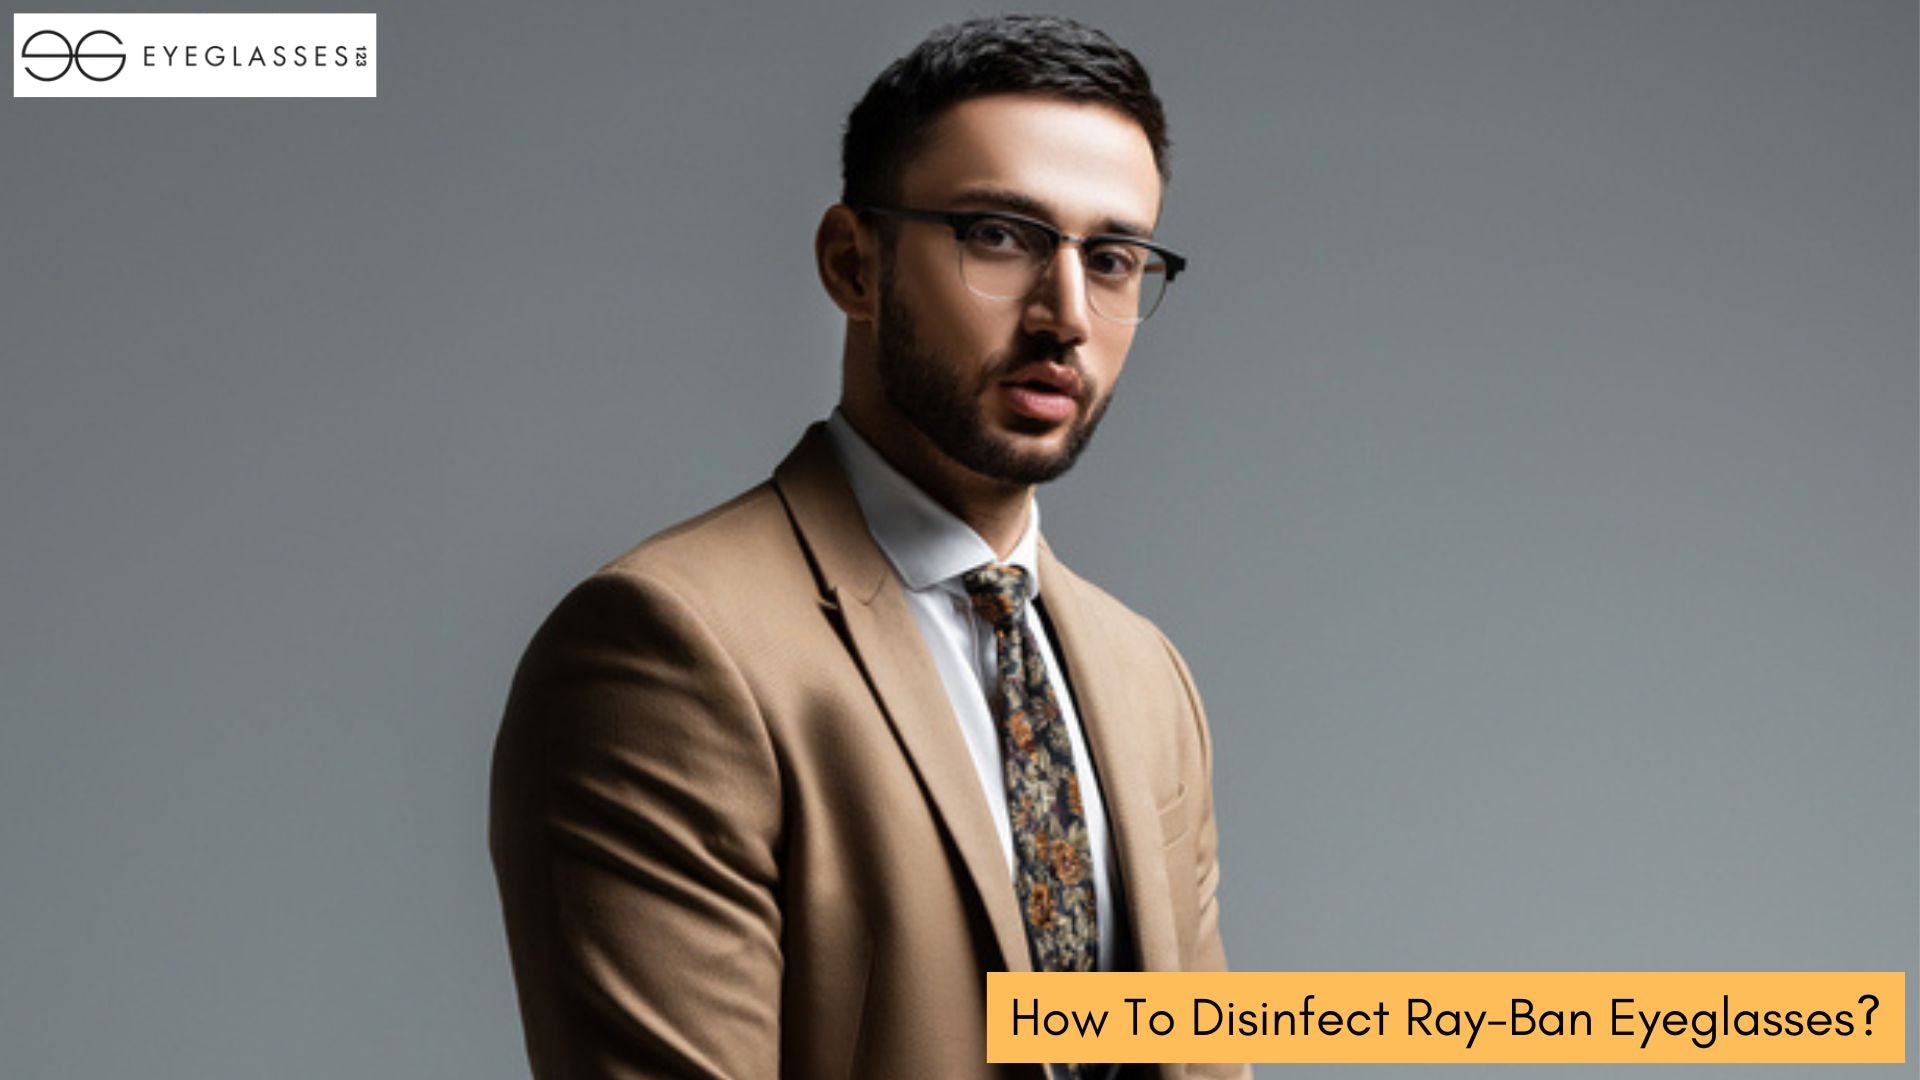 How To Disinfect Ray-Ban Eyeglasses?